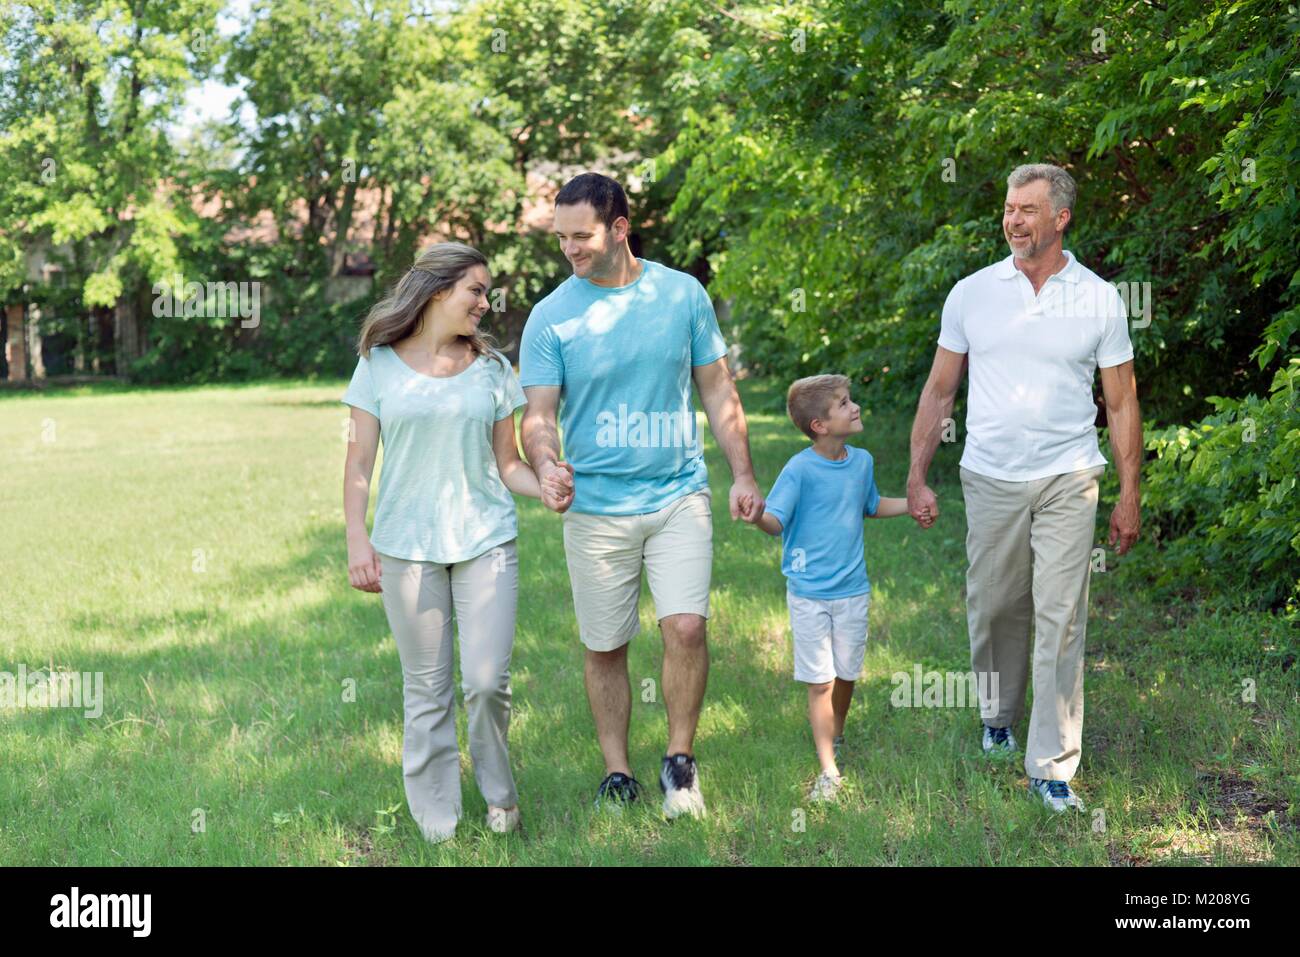 Family walking in park holding hands. Stock Photo